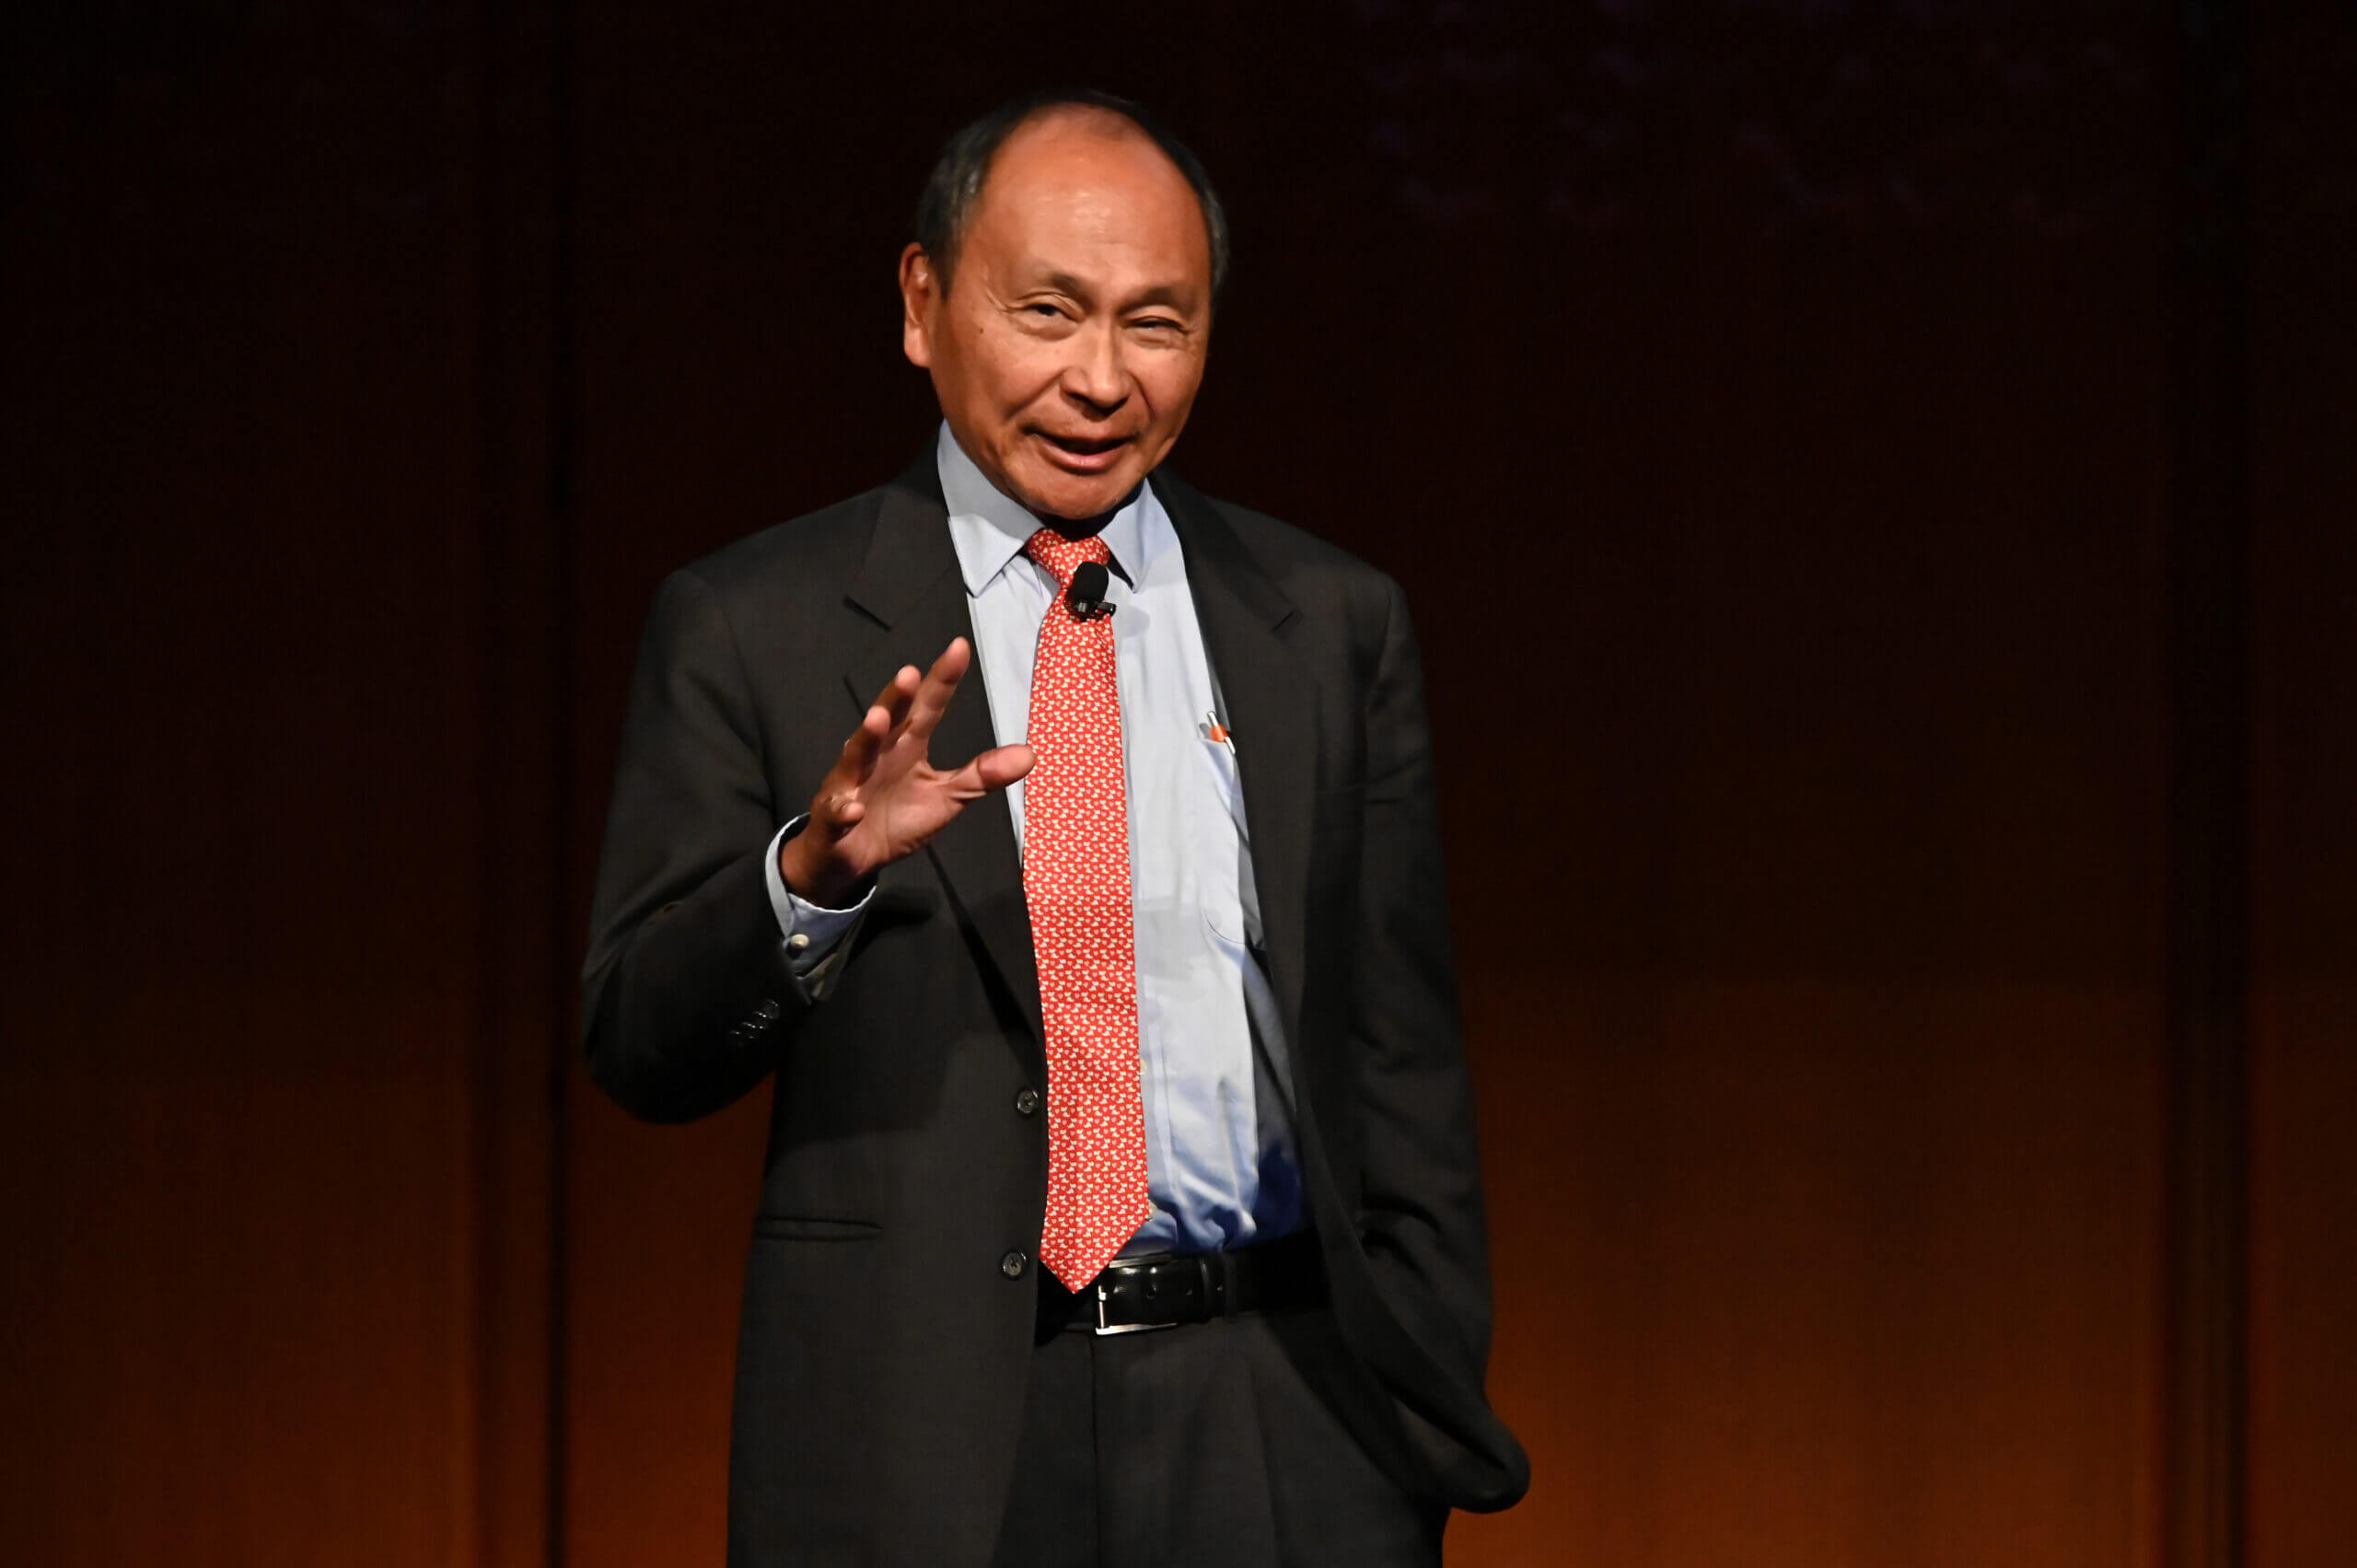 Francis Fukuyama speaks at a symposium in New York City, September 2019 (Astrid Stawiarz/Getty Images)